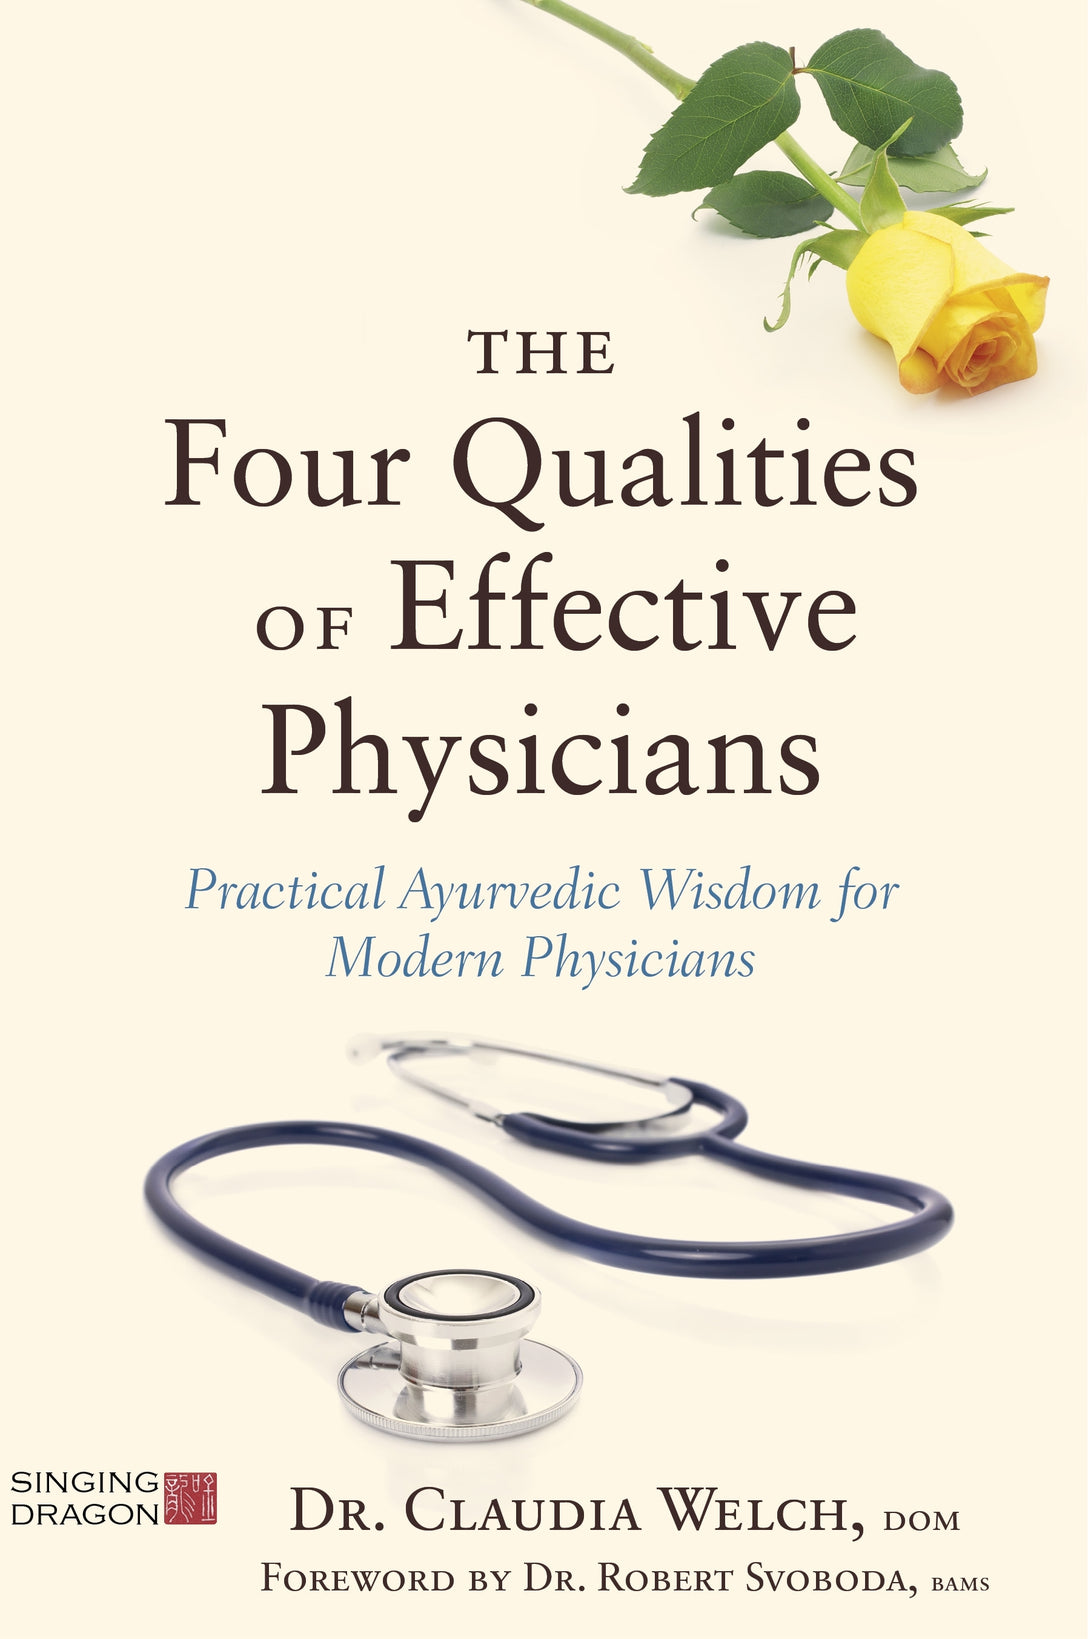 The Four Qualities of Effective Physicians by Robert Svoboda, Claudia Welch